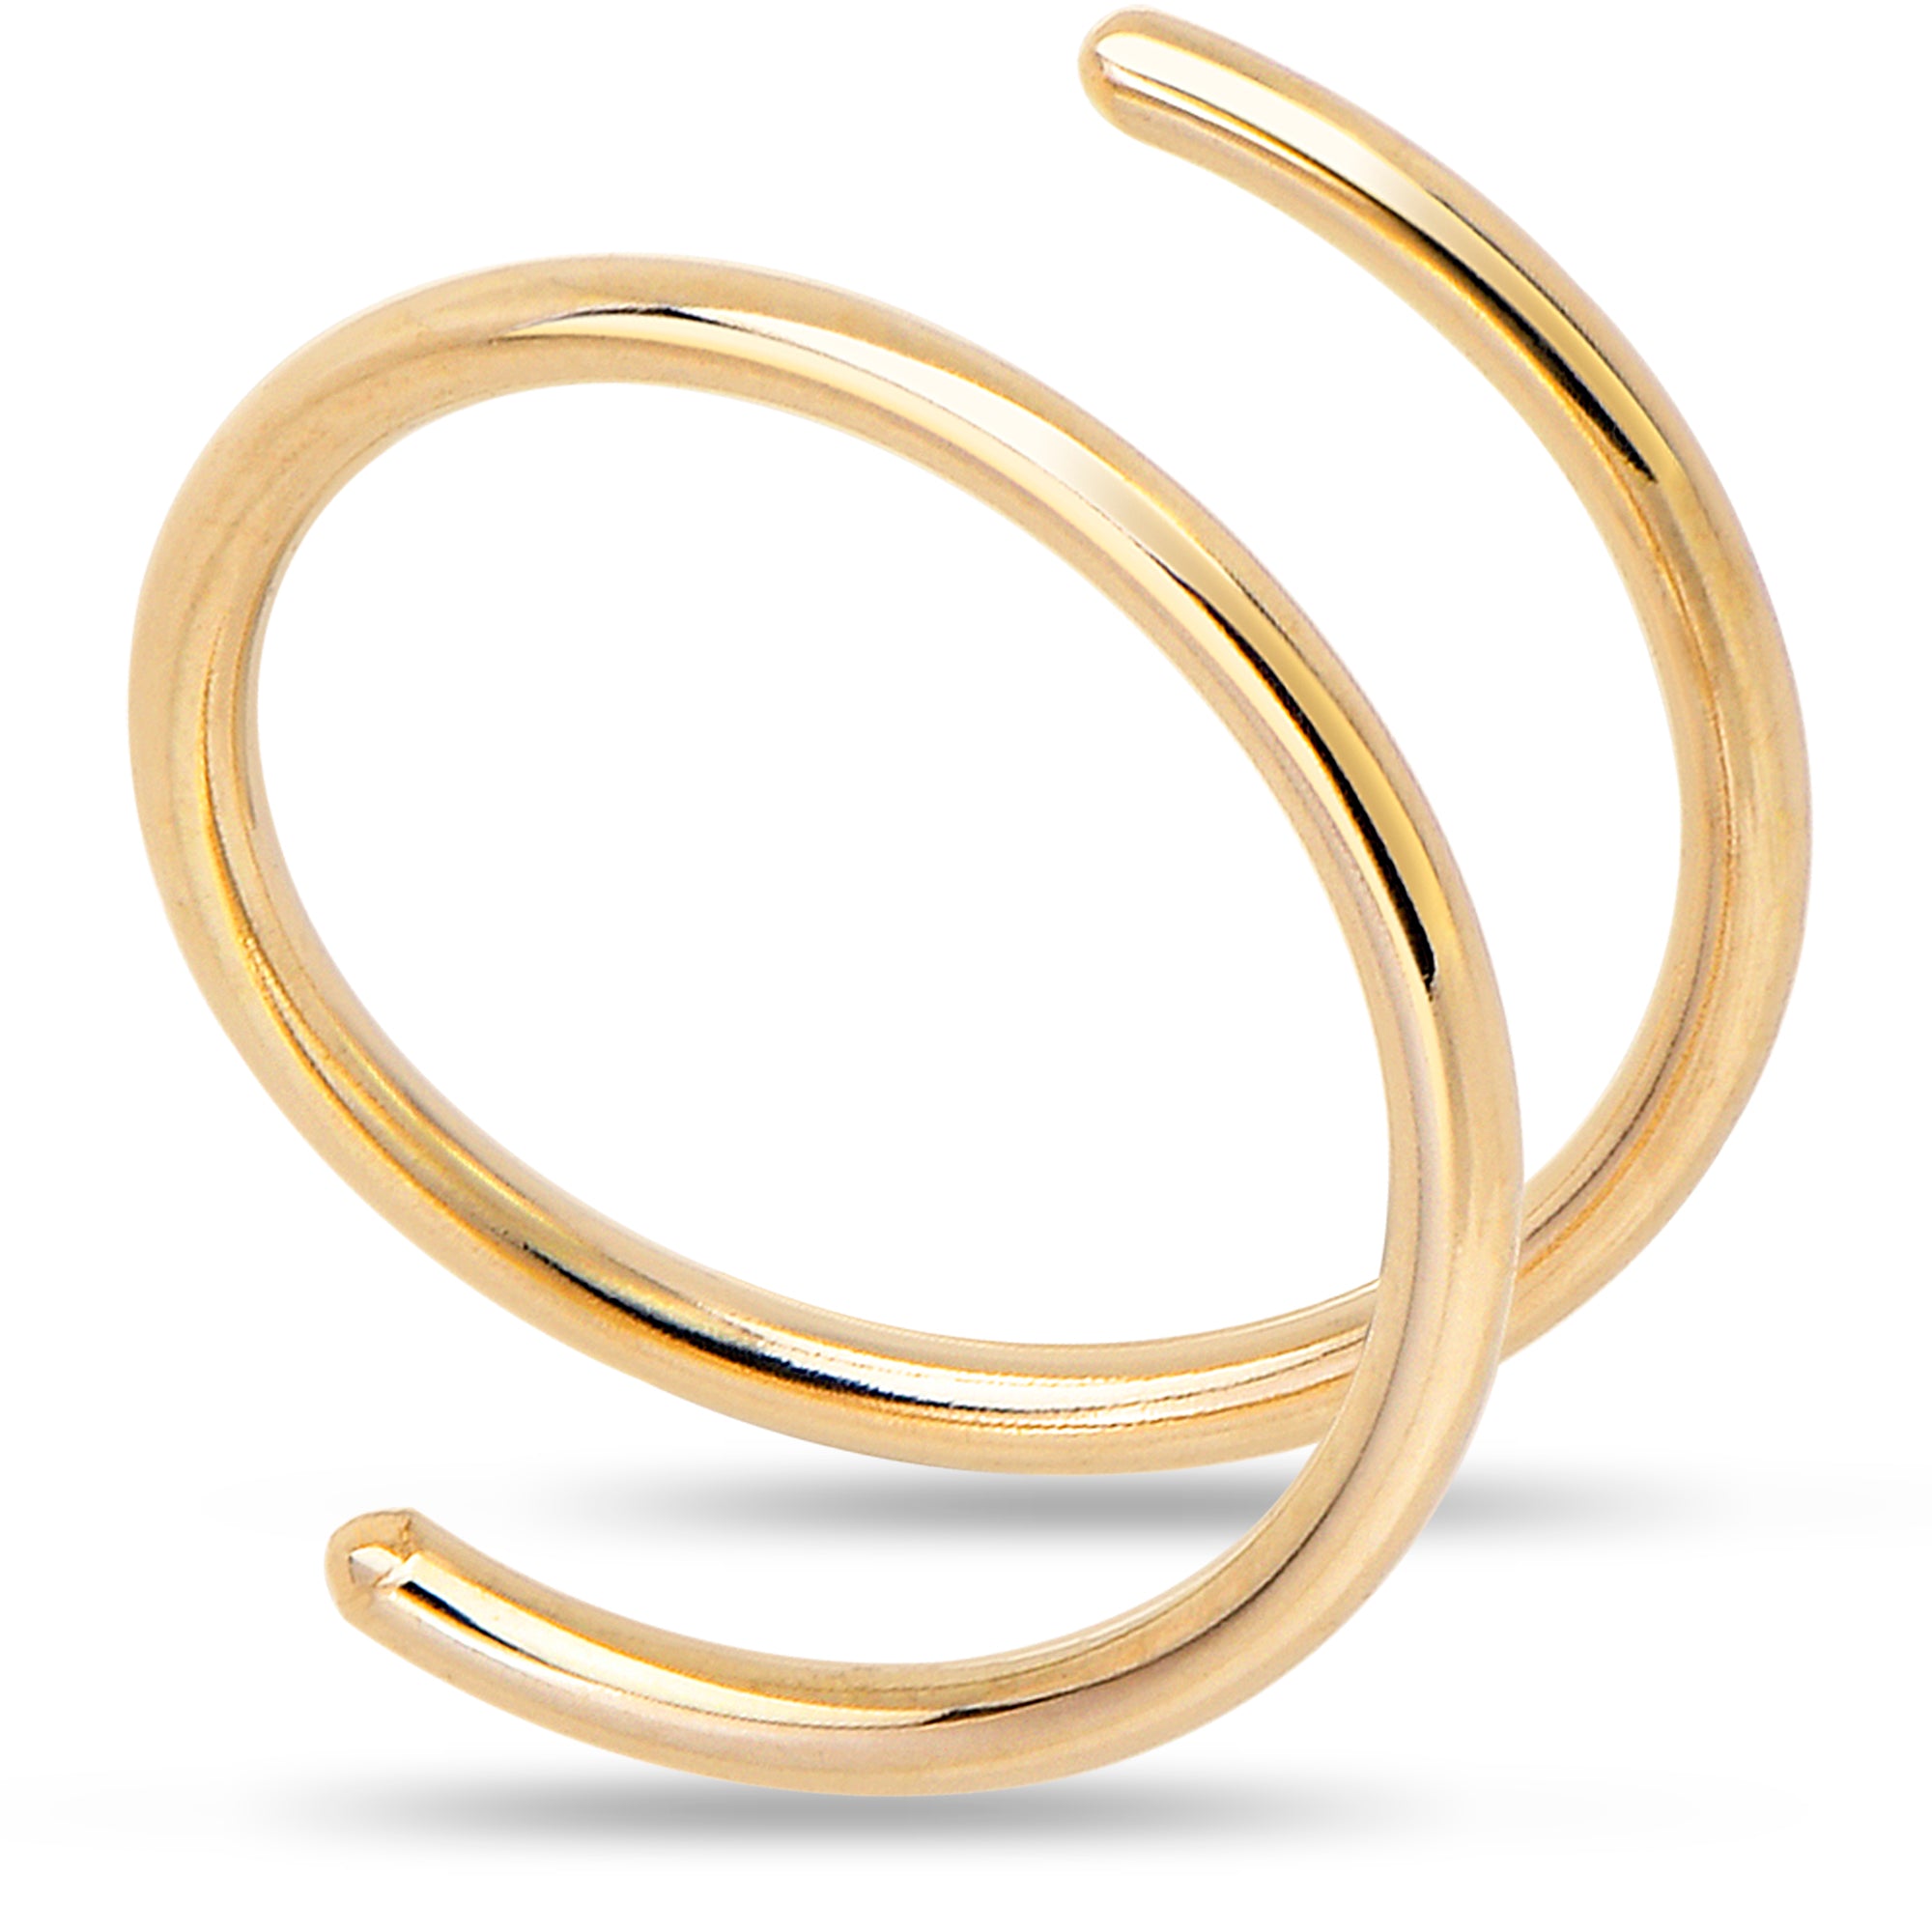 Double Hoop Nose 14K Yellow Gold Filled Spiral Nose Ring (Select Your Size) Piercing, 22 Gauge 6mm Right - 14kt Gold Nose Hoop - Body Candy